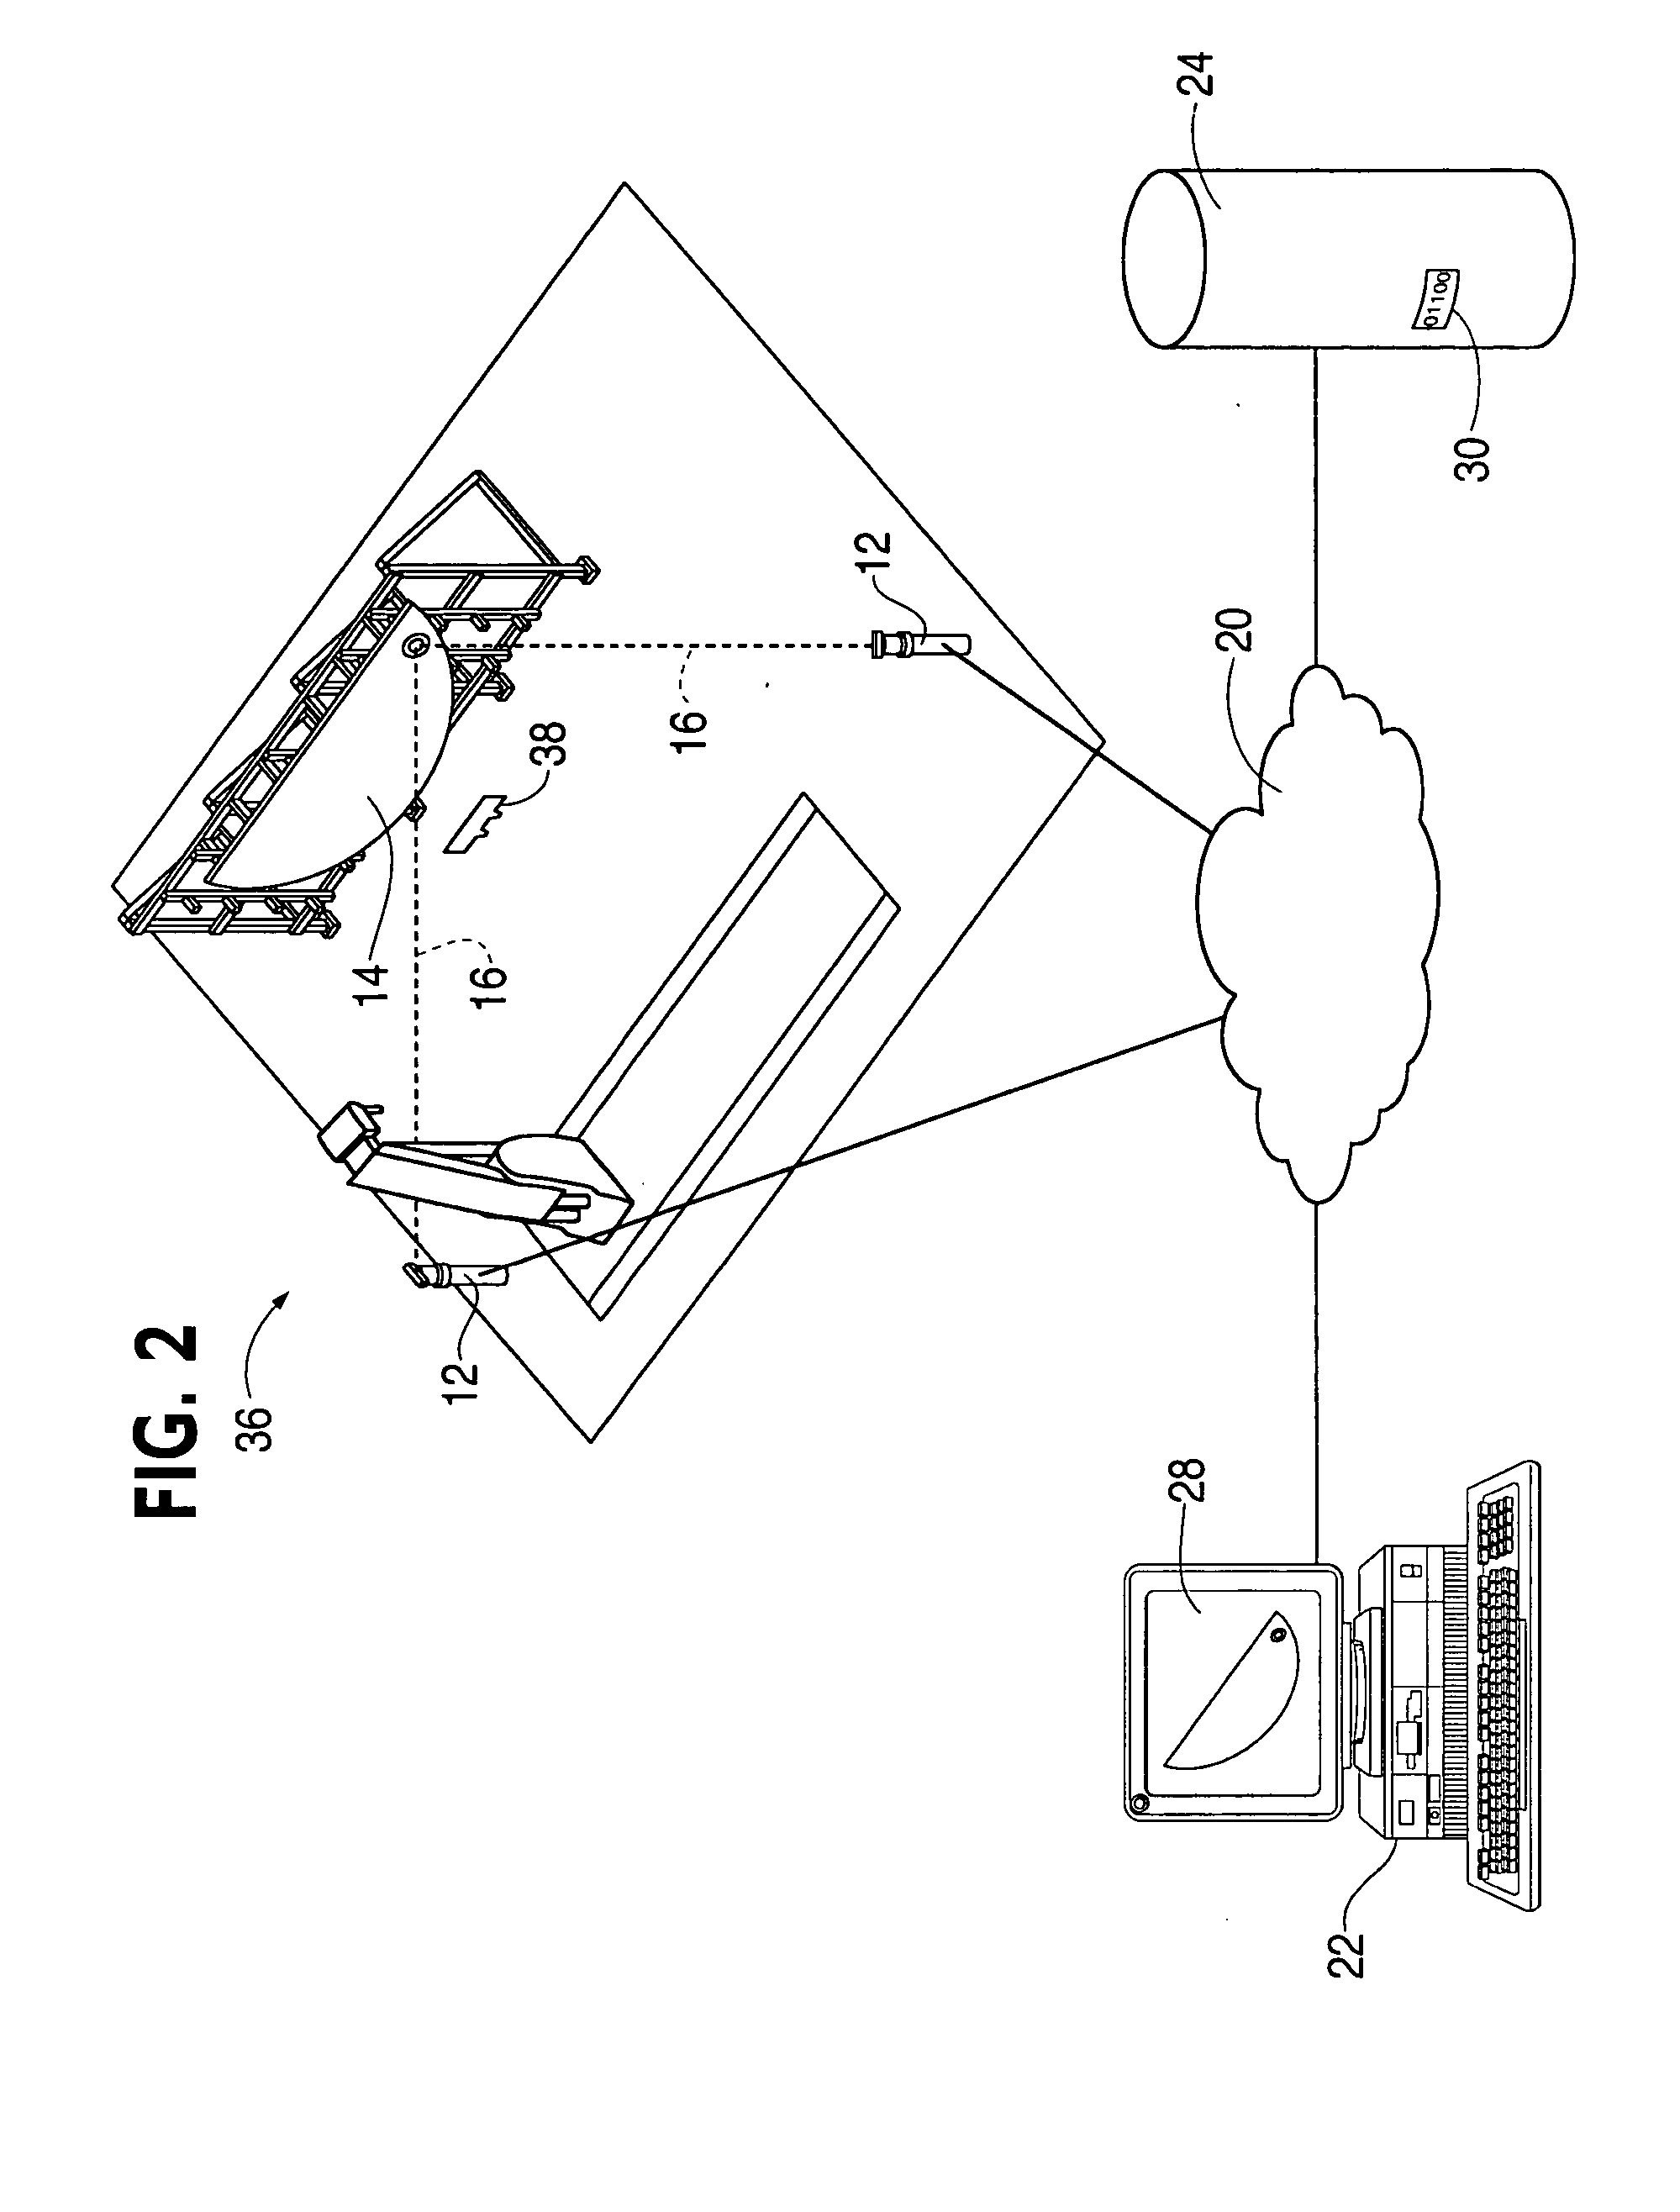 System and method for manufacturing and after-market support using as-built data